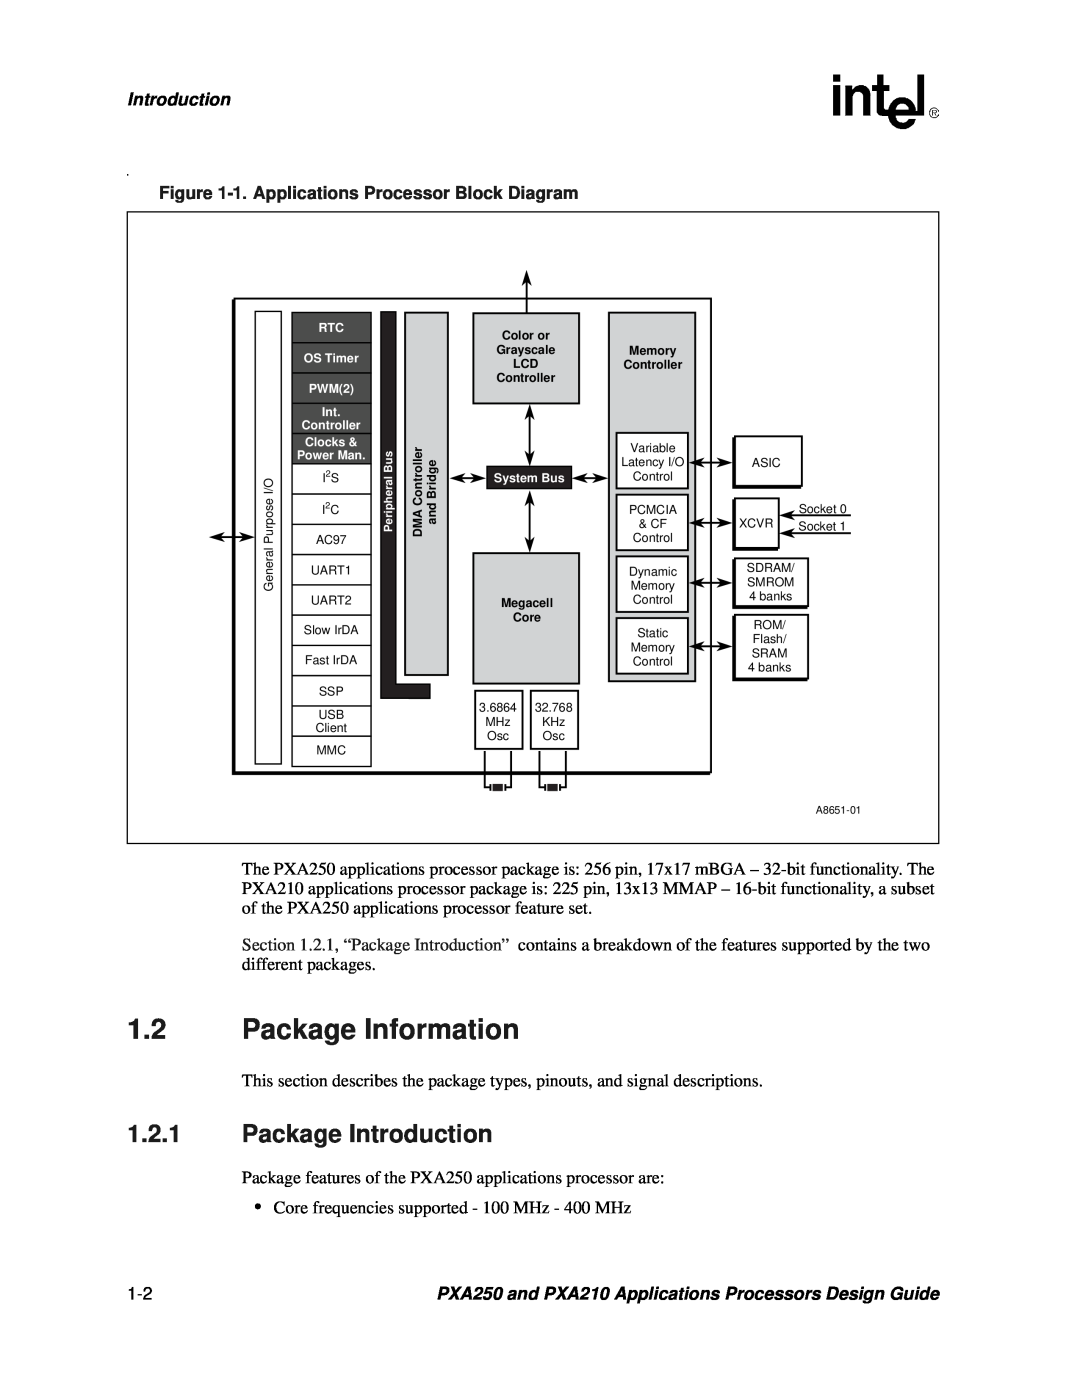 Intel PXA250 and PXA210 Package Information, Package Introduction, 1. Applications Processor Block Diagram, OS Timer, PWM2 